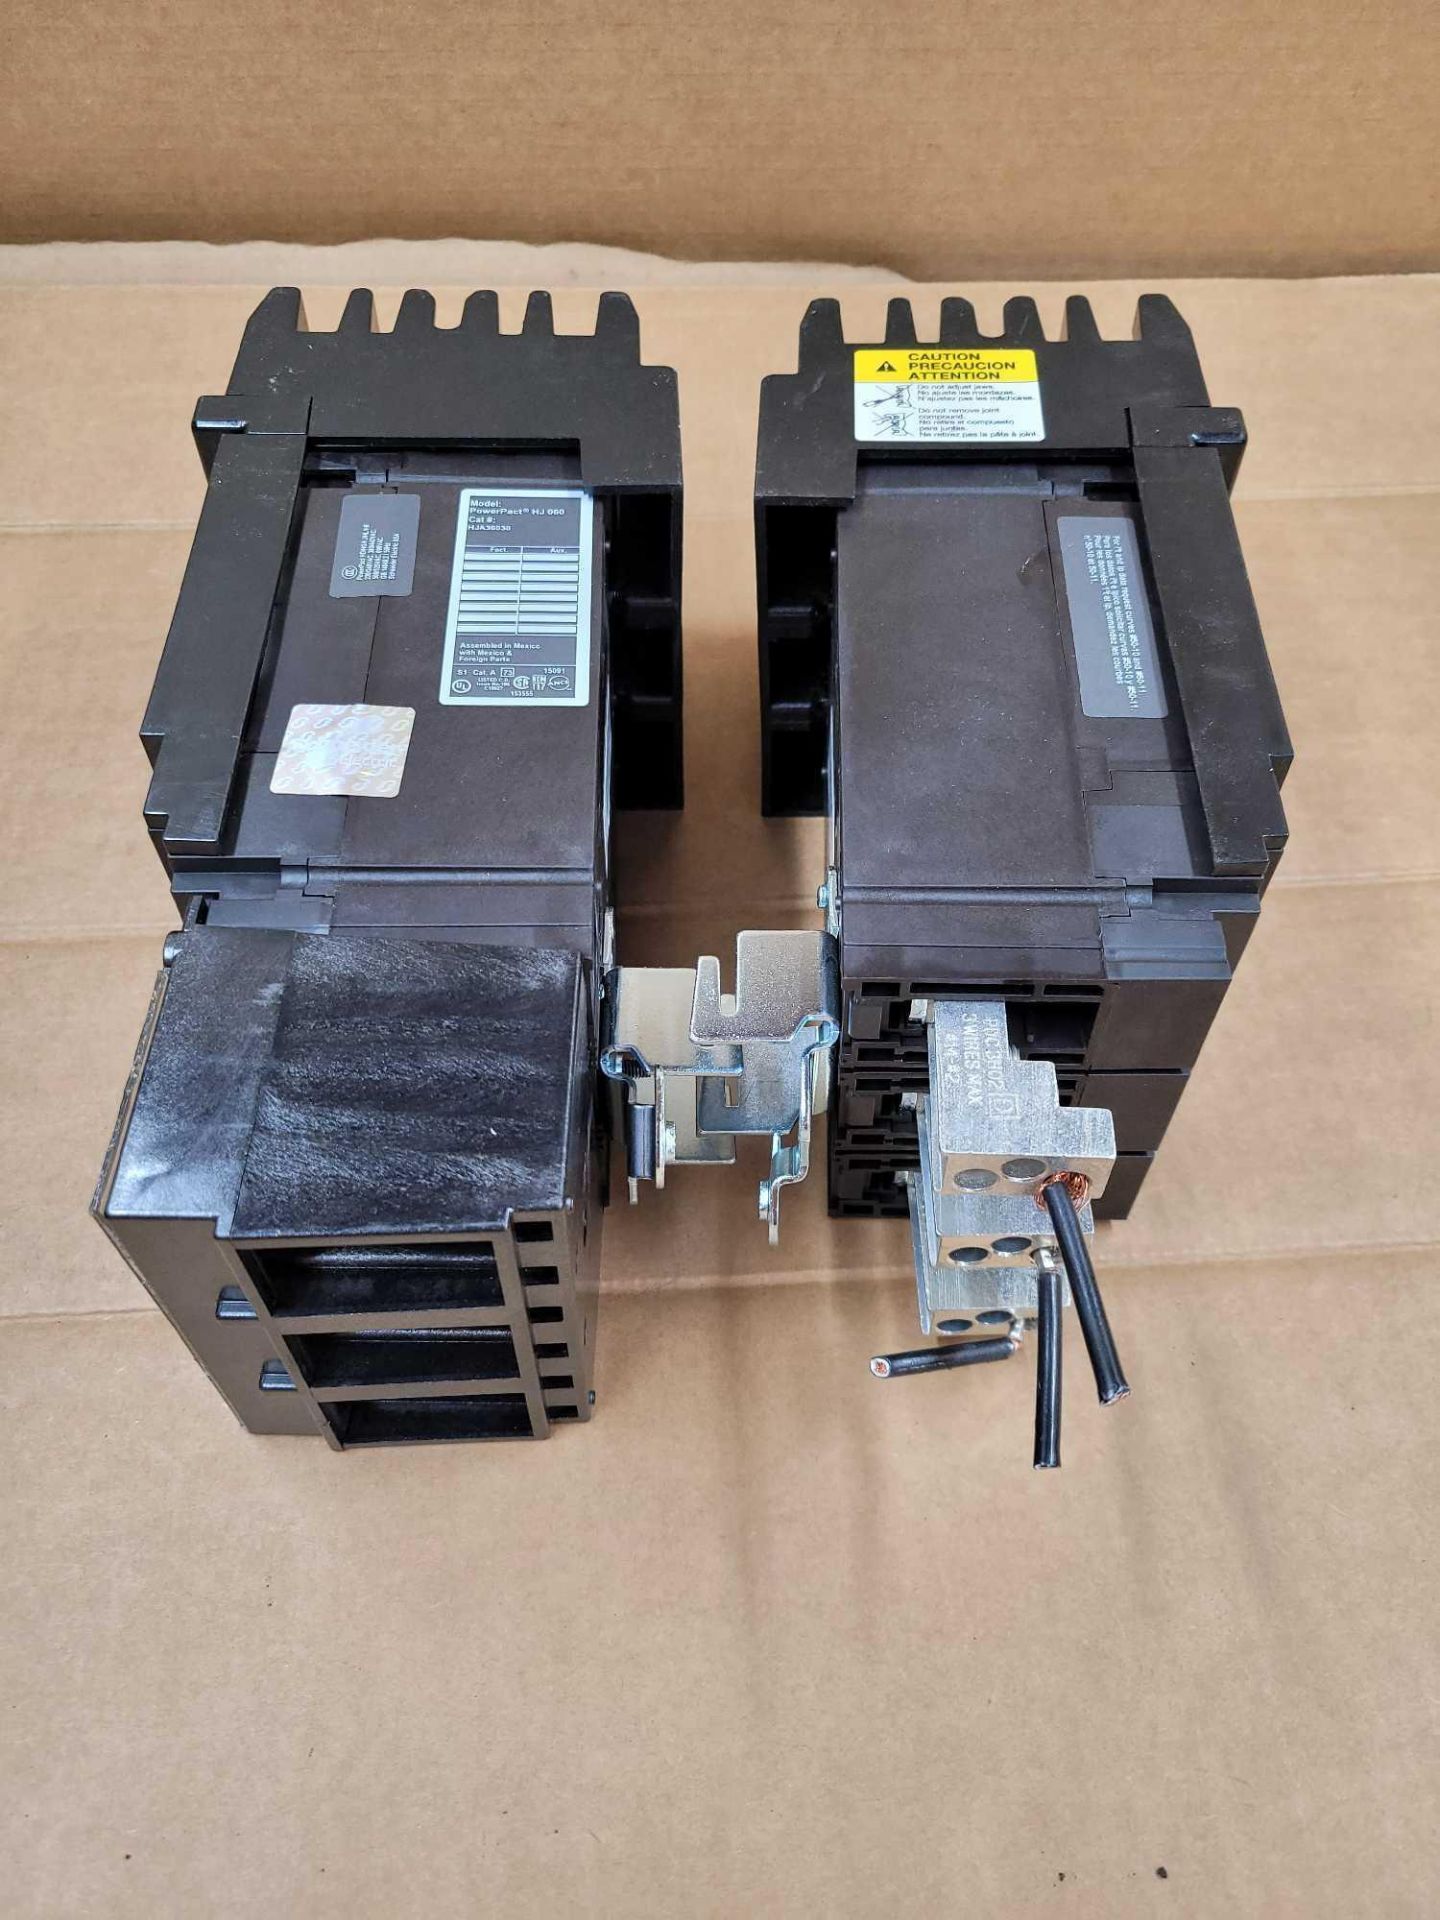 LOT OF 2 SQUARE D HJA36030 / 30 Amp Molded Case Circuit Breaker  /  Lot Weight: 9.6 lbs - Image 4 of 6